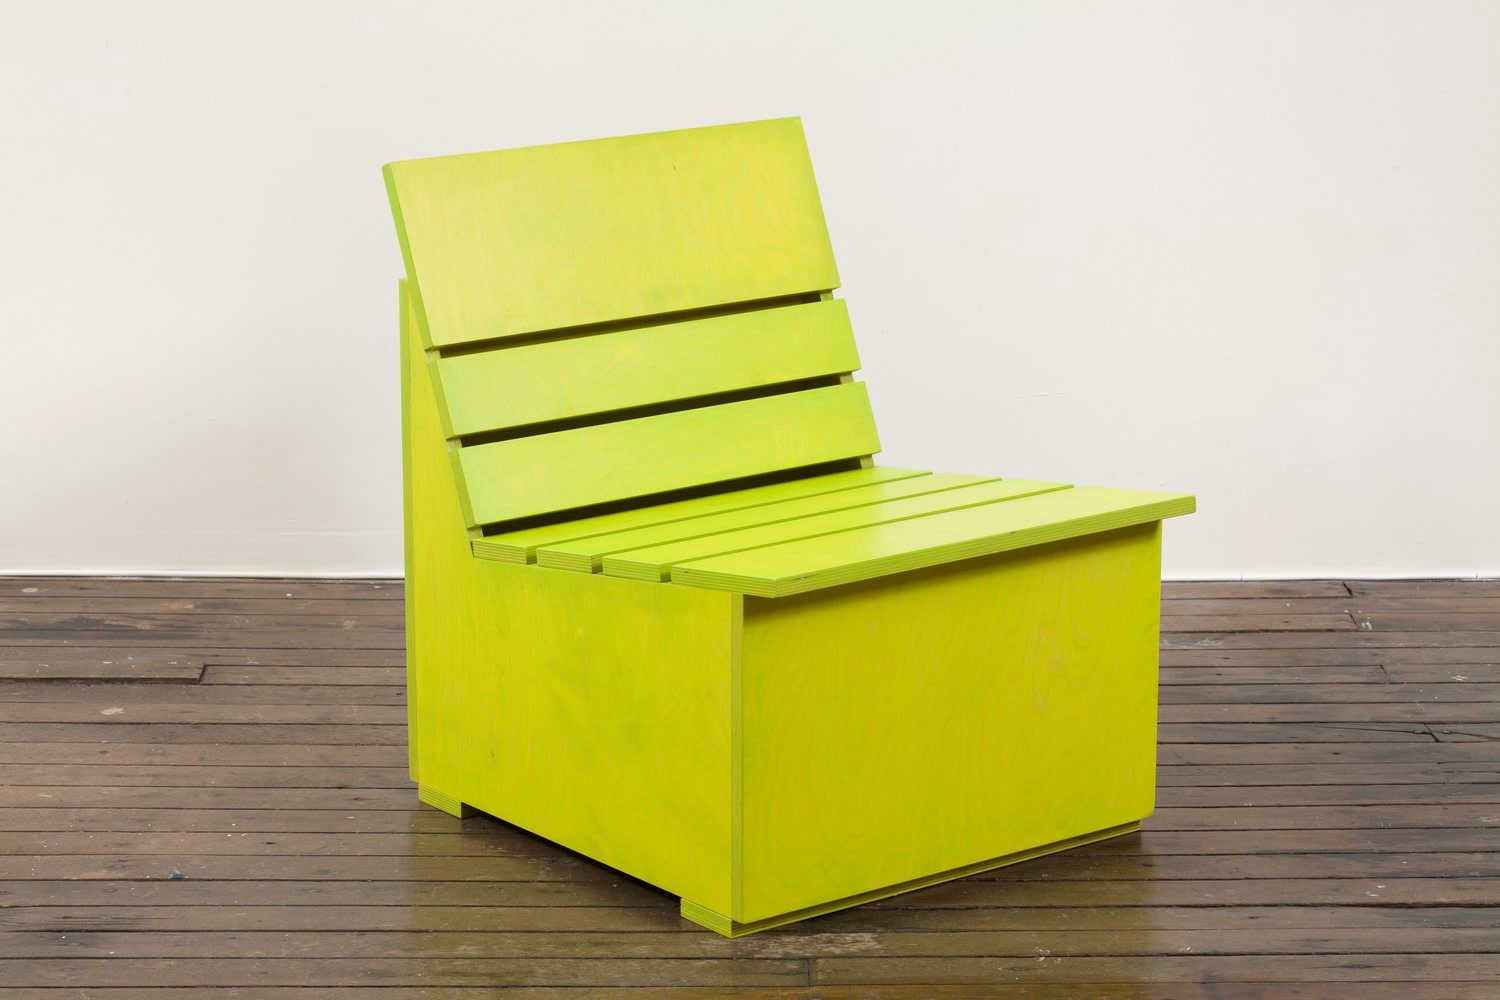 Mary Heilmann
Sunny Chaise #8, 2015
Painted plywood
25.5 x 20.5 x 24.5 inches